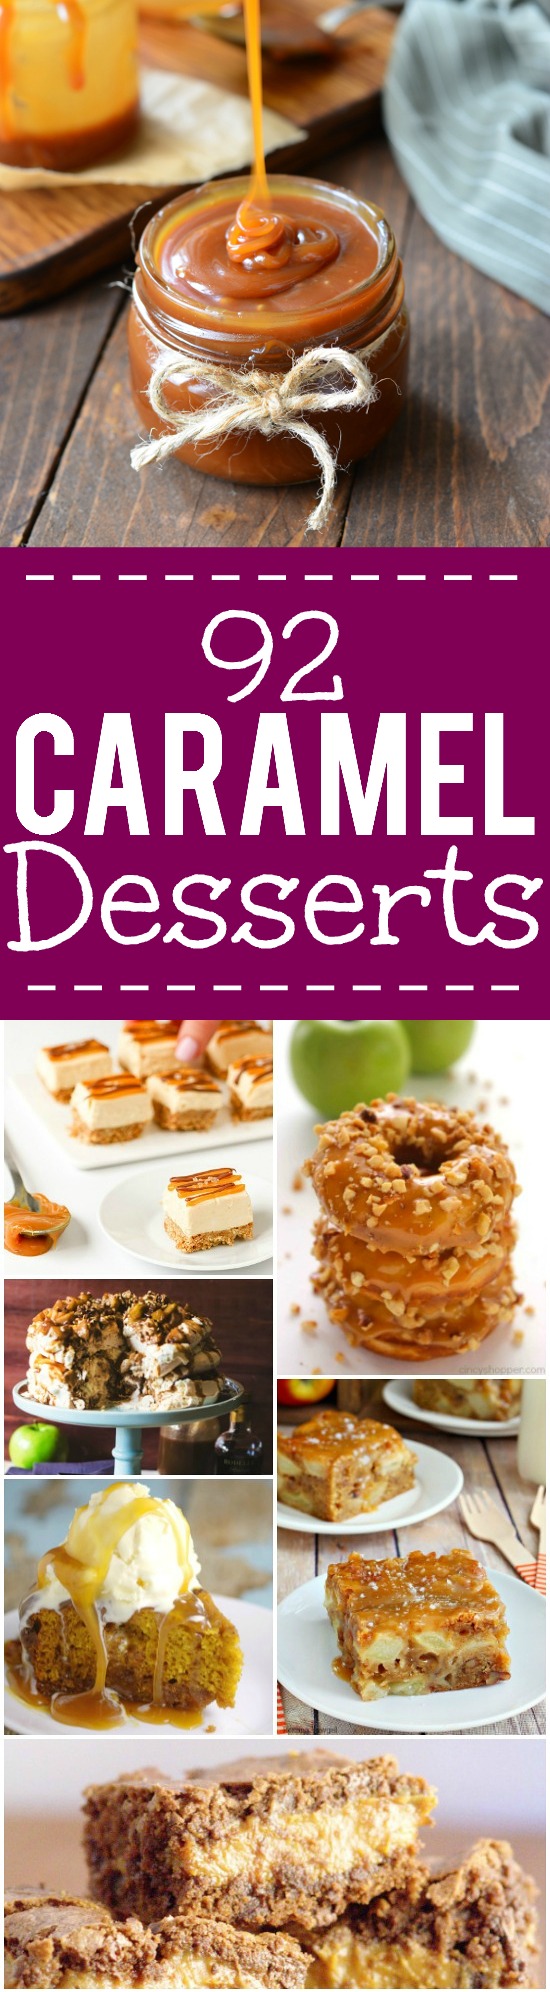 92 Caramel Desserts Recipes - 92 of the BEST scrumptious and decadent caramel desserts recipes that are totally drool-worthy.  Make these gooey, sweet caramel recipes and indulge your sweet tooth! Wow! These look amazing! Can't decide which one I want to try first!